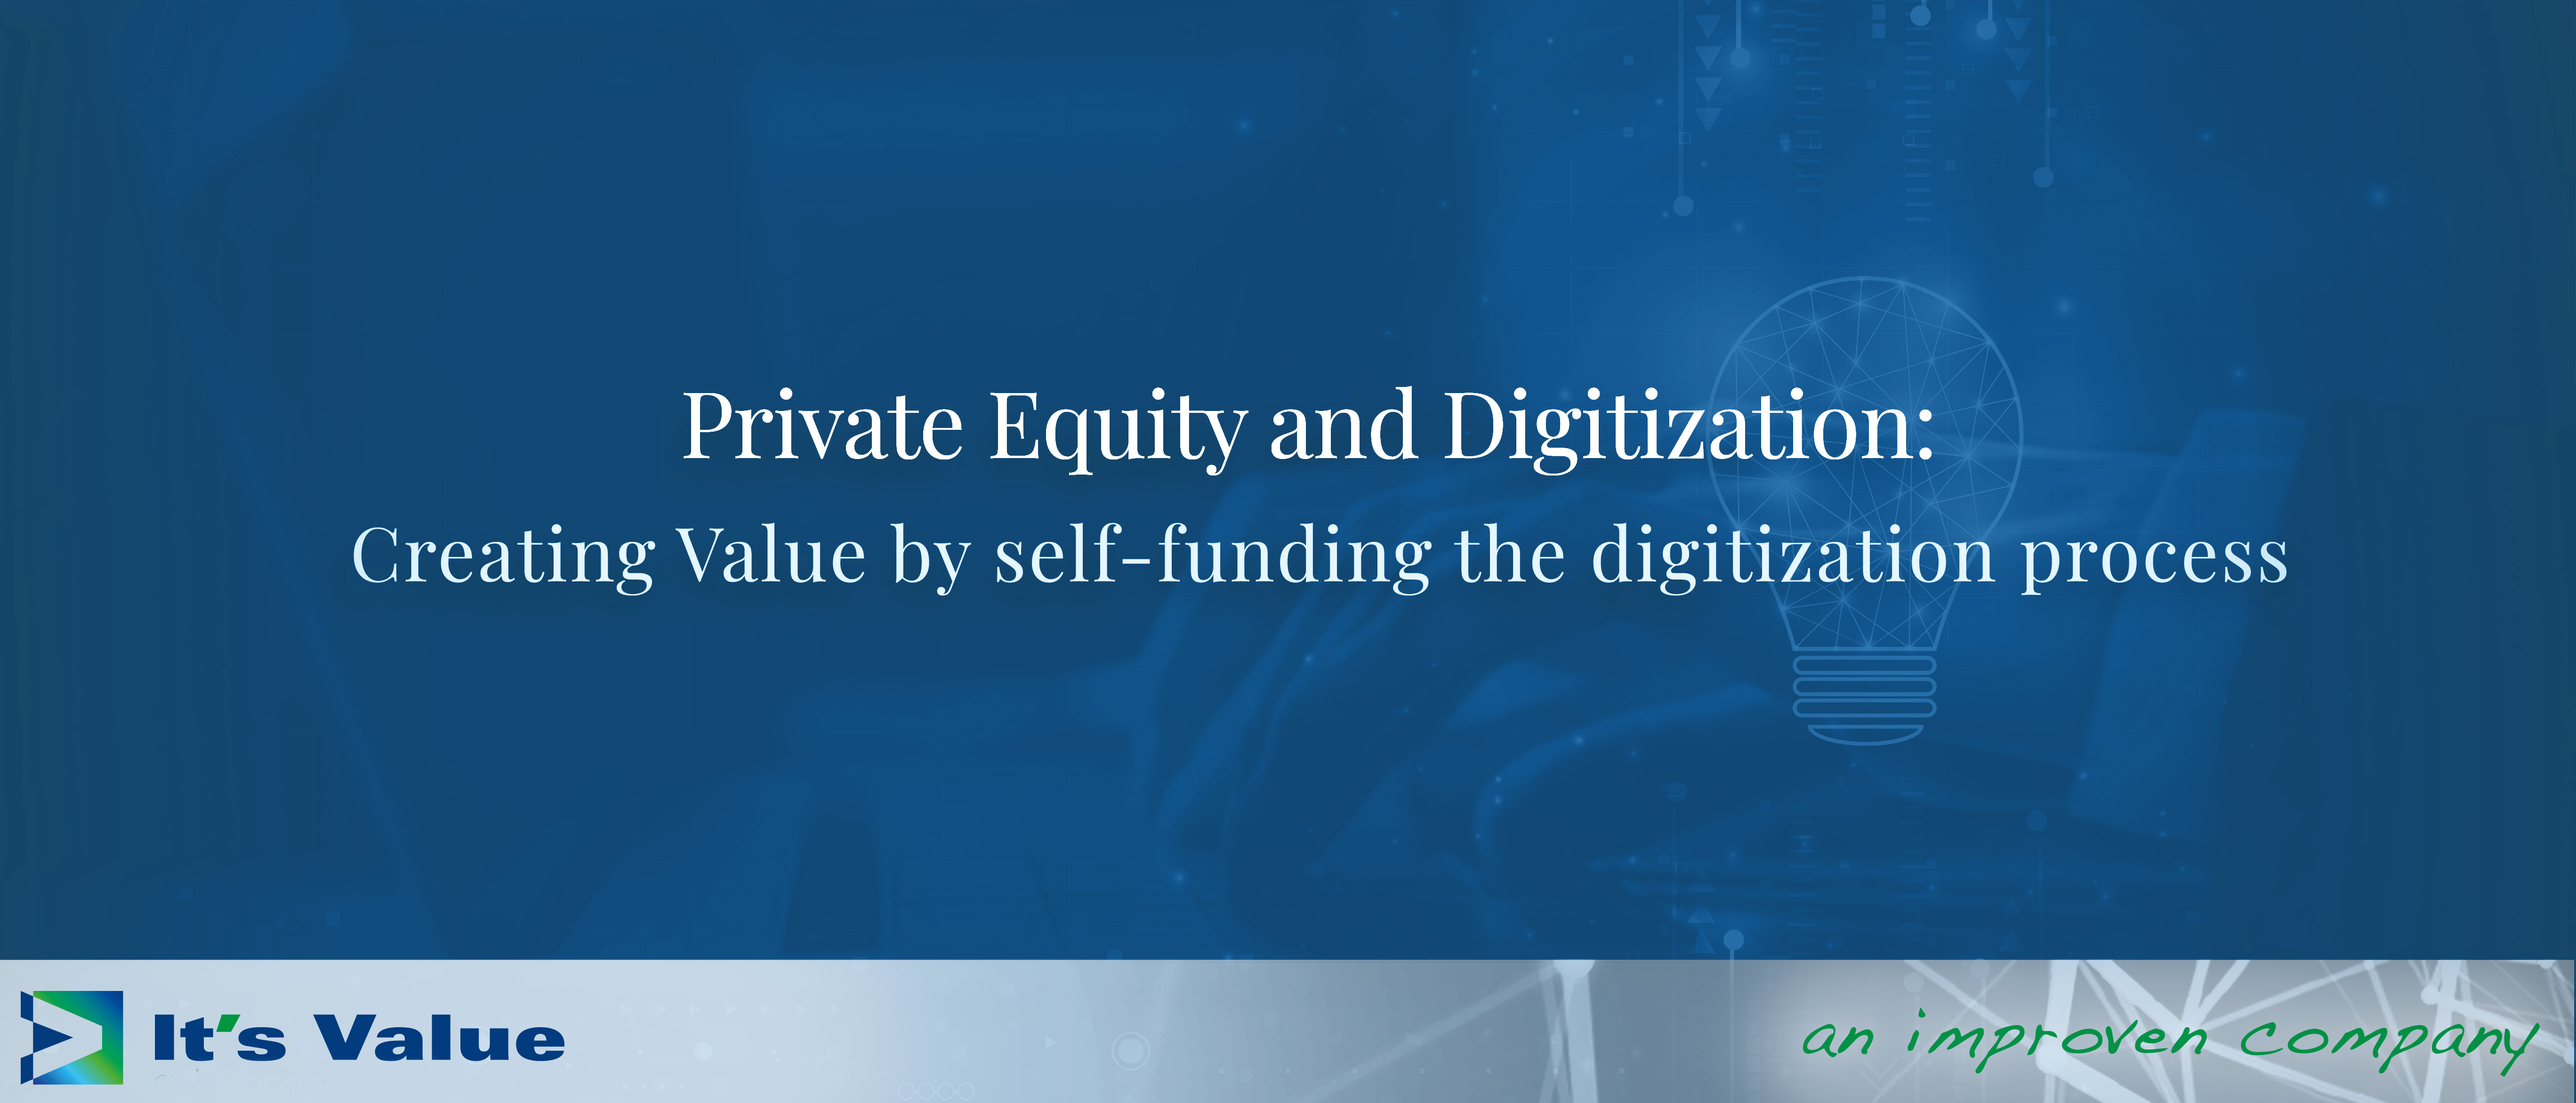 Private Equity and Digitization: Creating Value by self-funding the digitization process